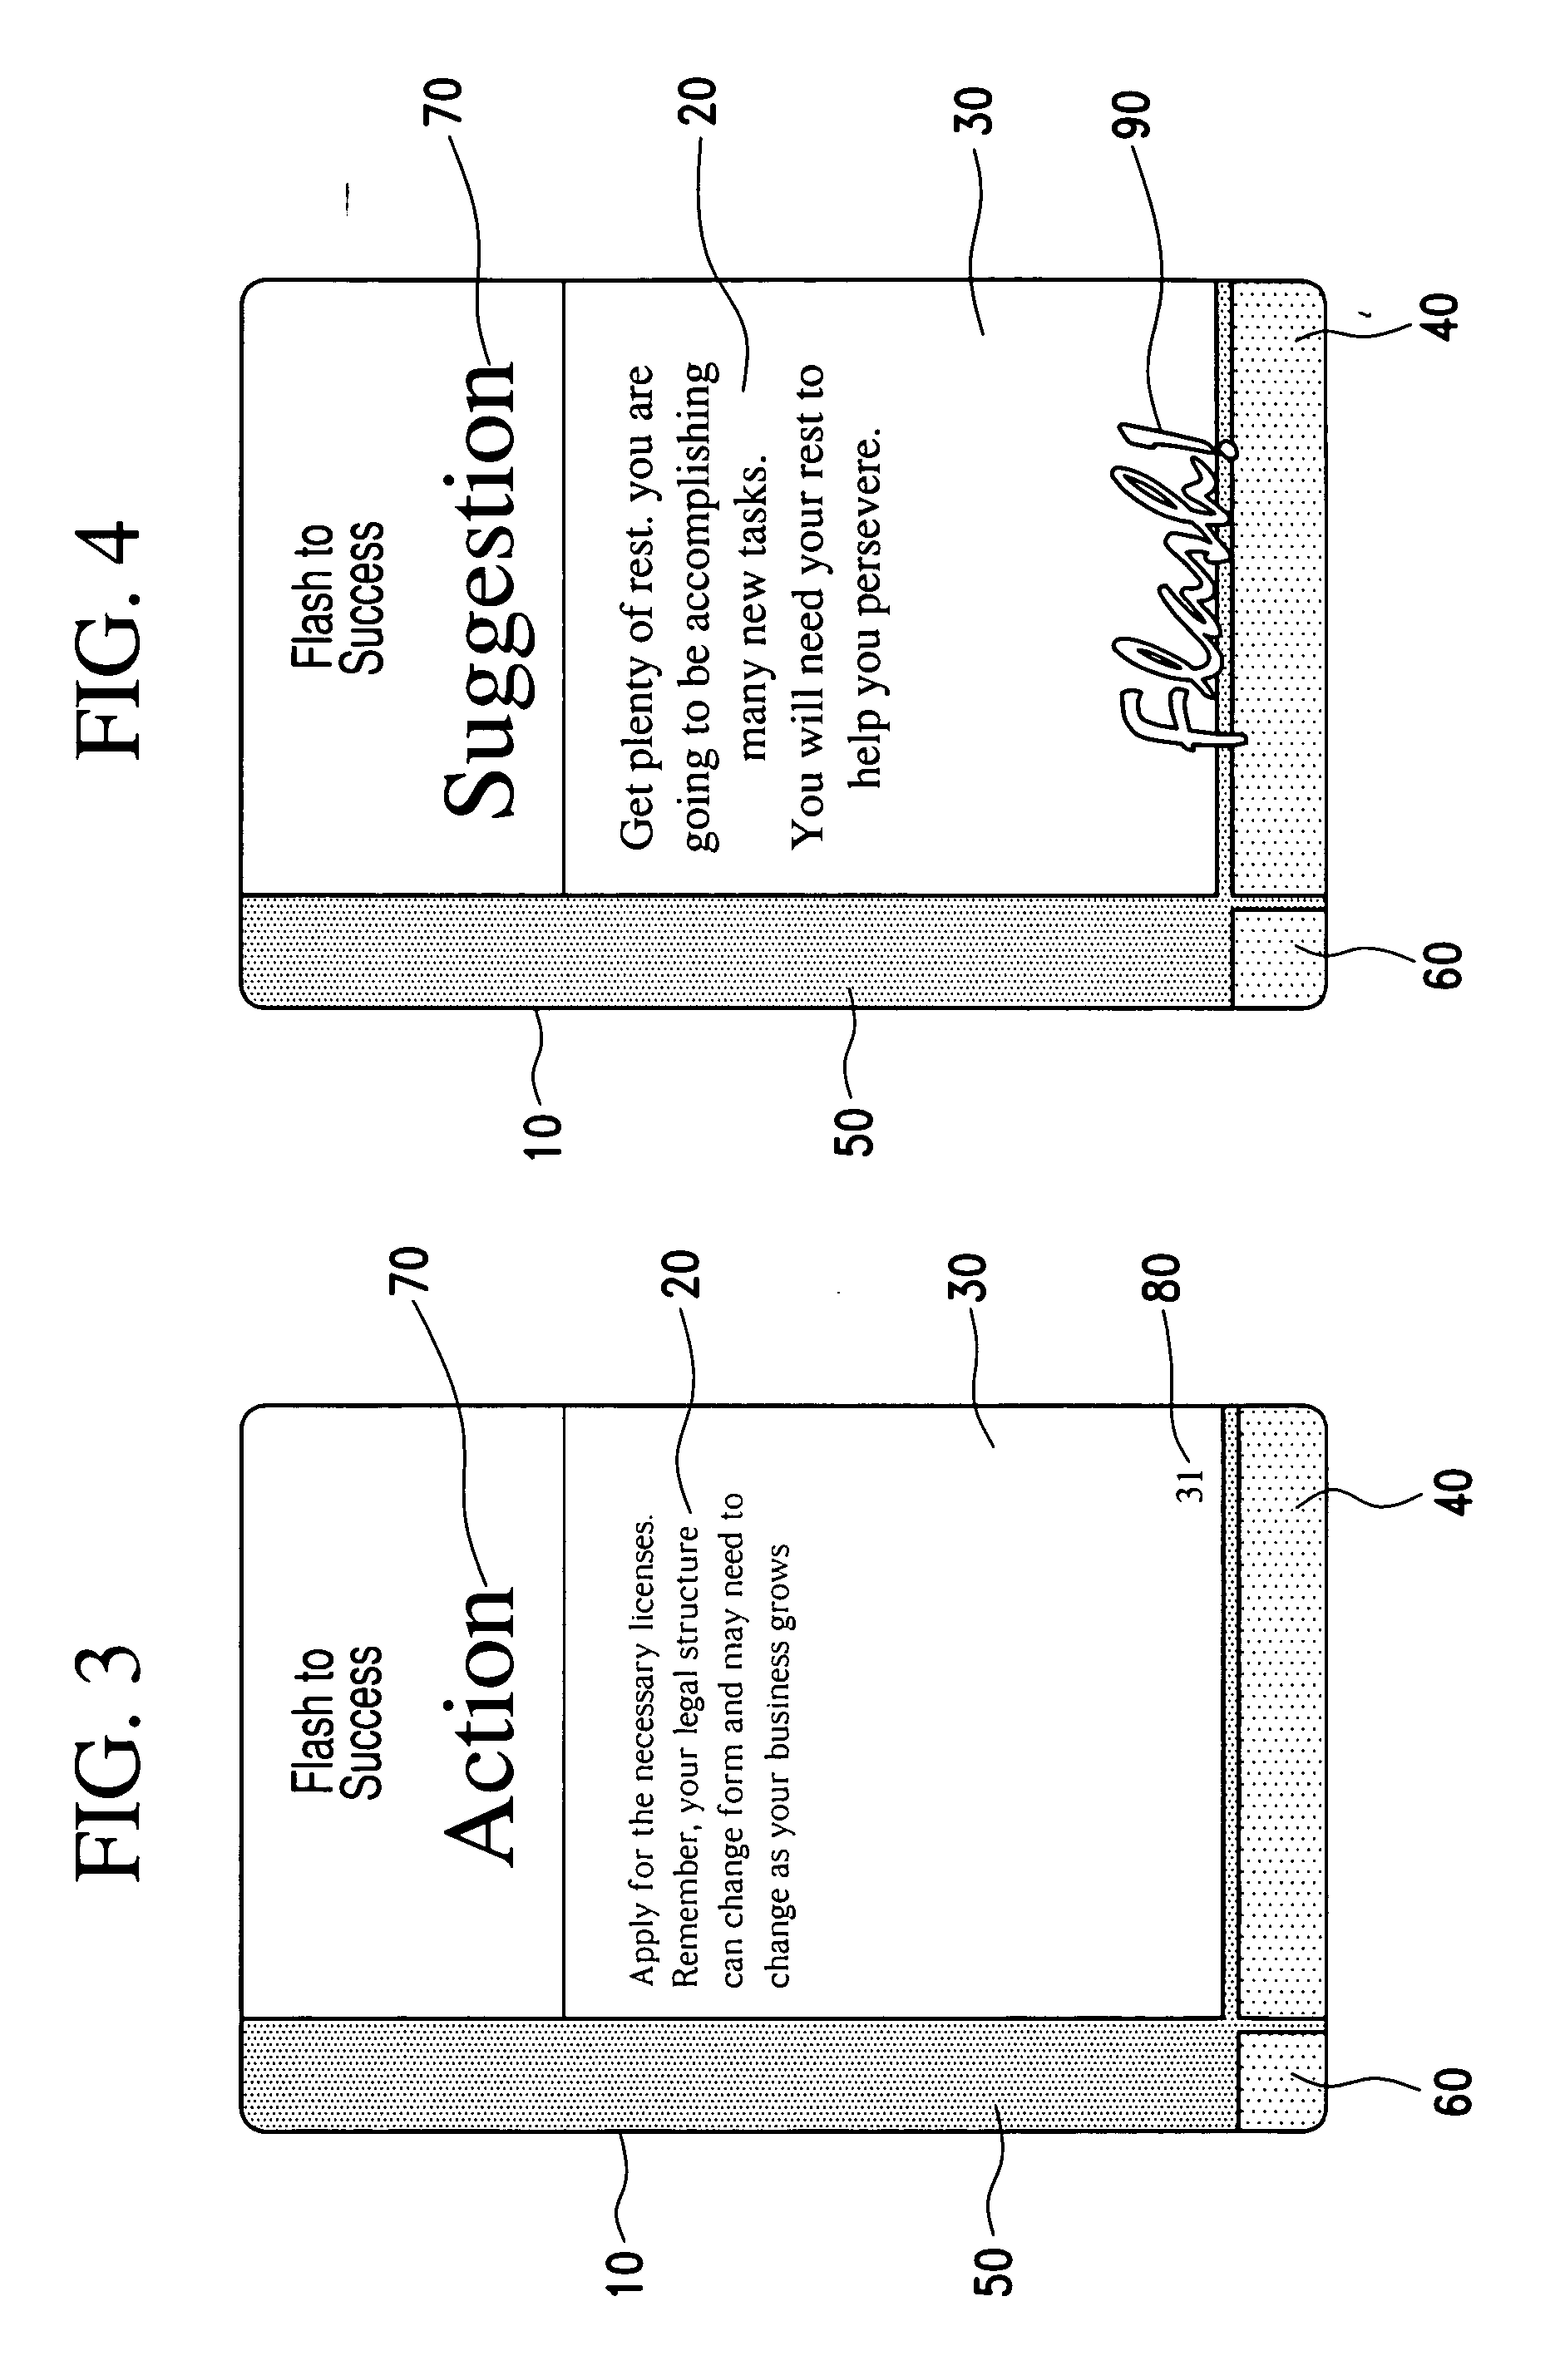 Apparatus and methods for facilitating multi-component, goal-oriented processes